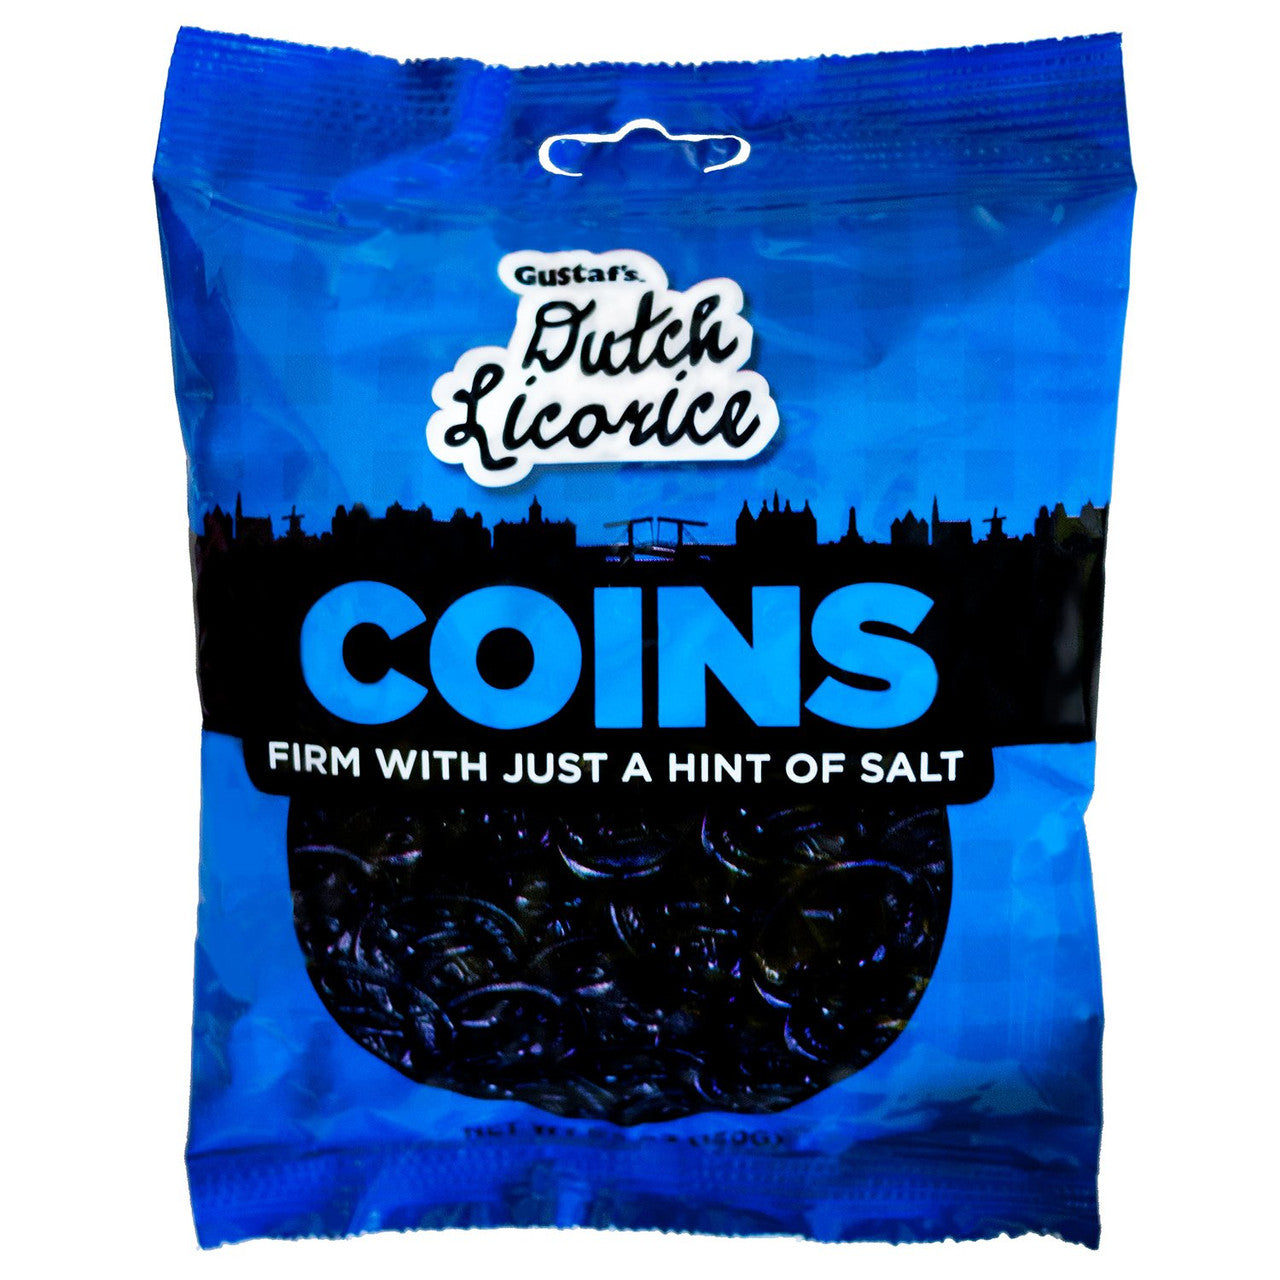 Gustaf's Dutch Licorice Coins With Hint Of Salt, 150g/5.2 oz. (12pk) {Imported from Canada}